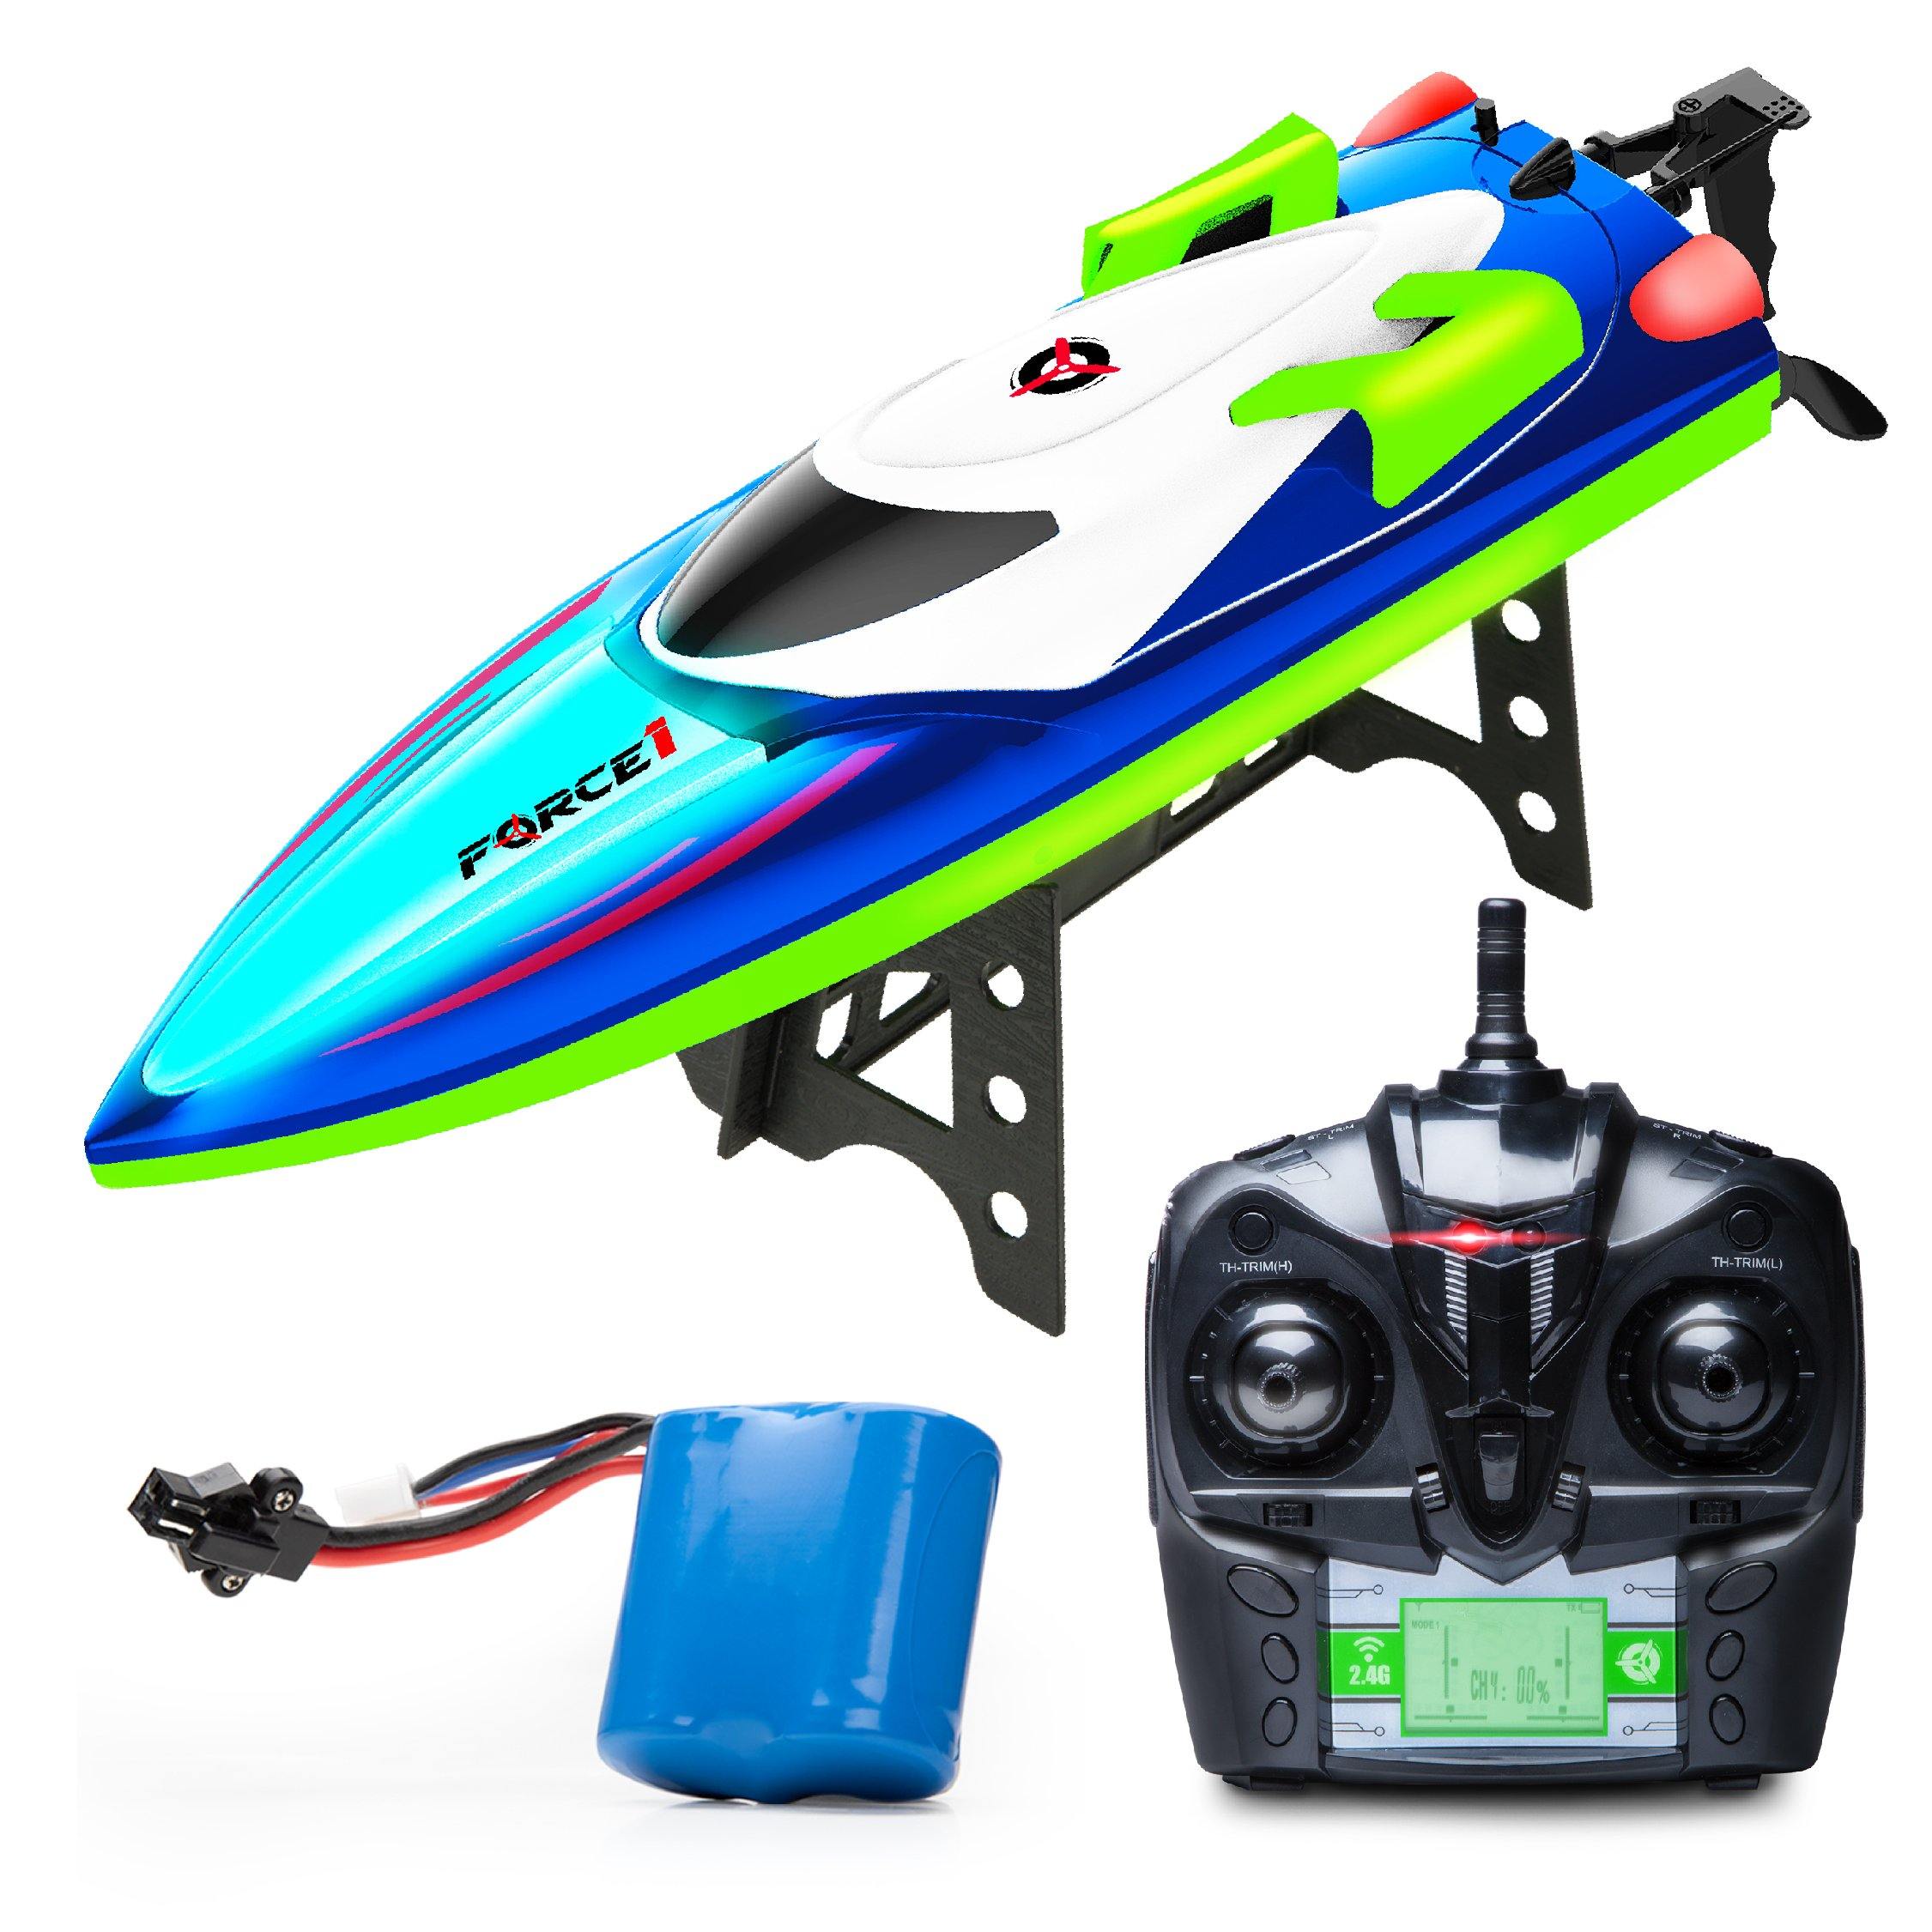 Force1 Velocity LED RC Boat with 20+ mph Speed, Remote Control, and Rechargeable Toy Boat Battery - USA Toyz